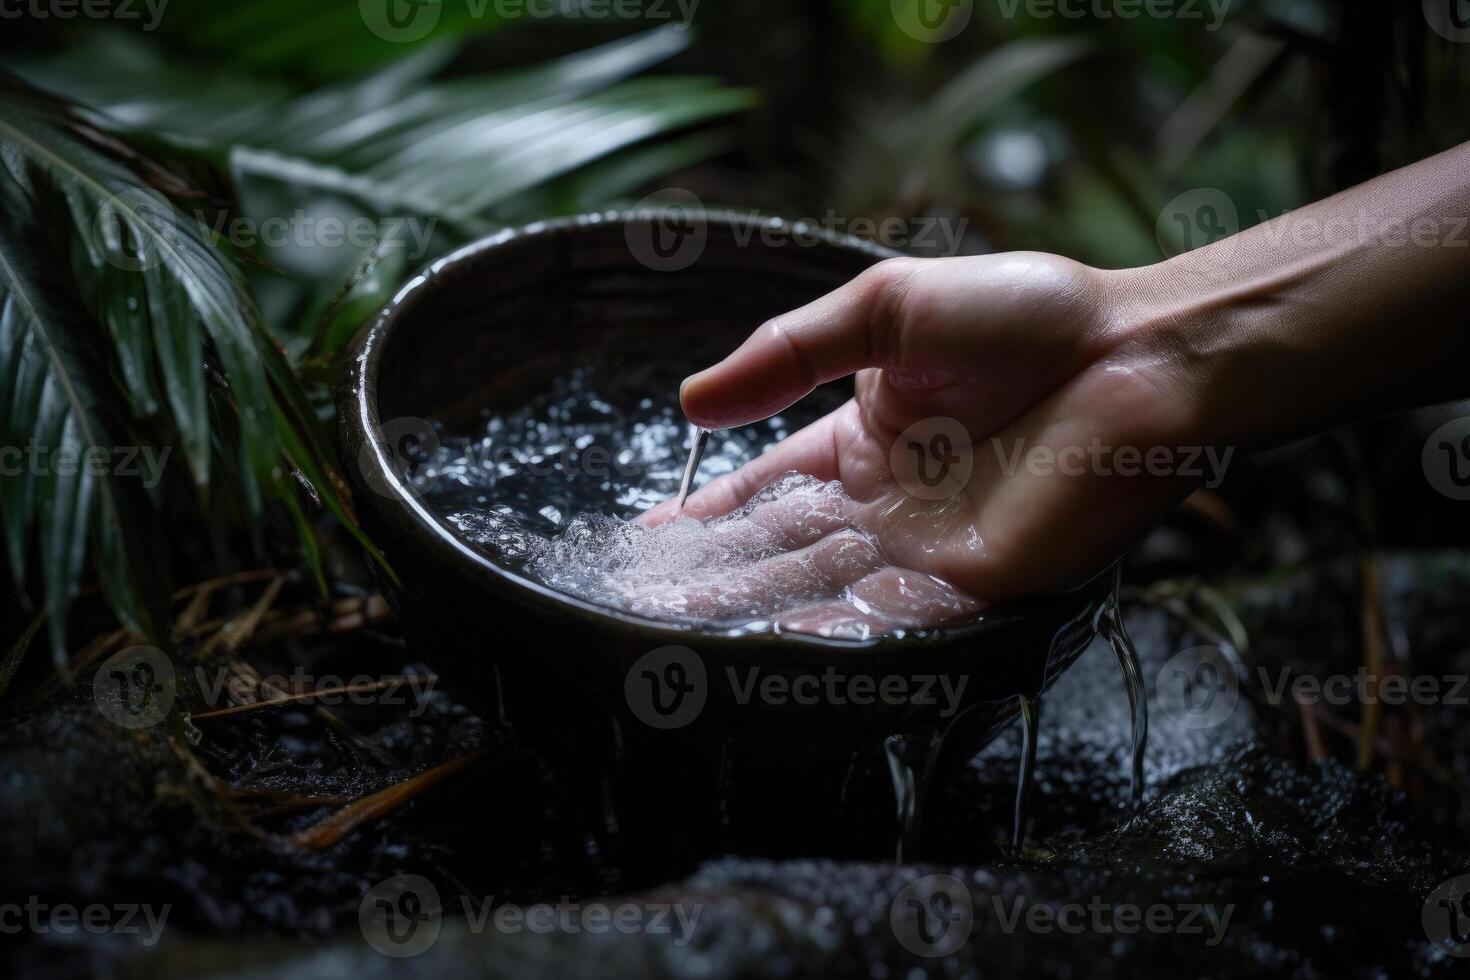 moisturizing the skin jungle tropical water, wash hand in a bowl of water photo